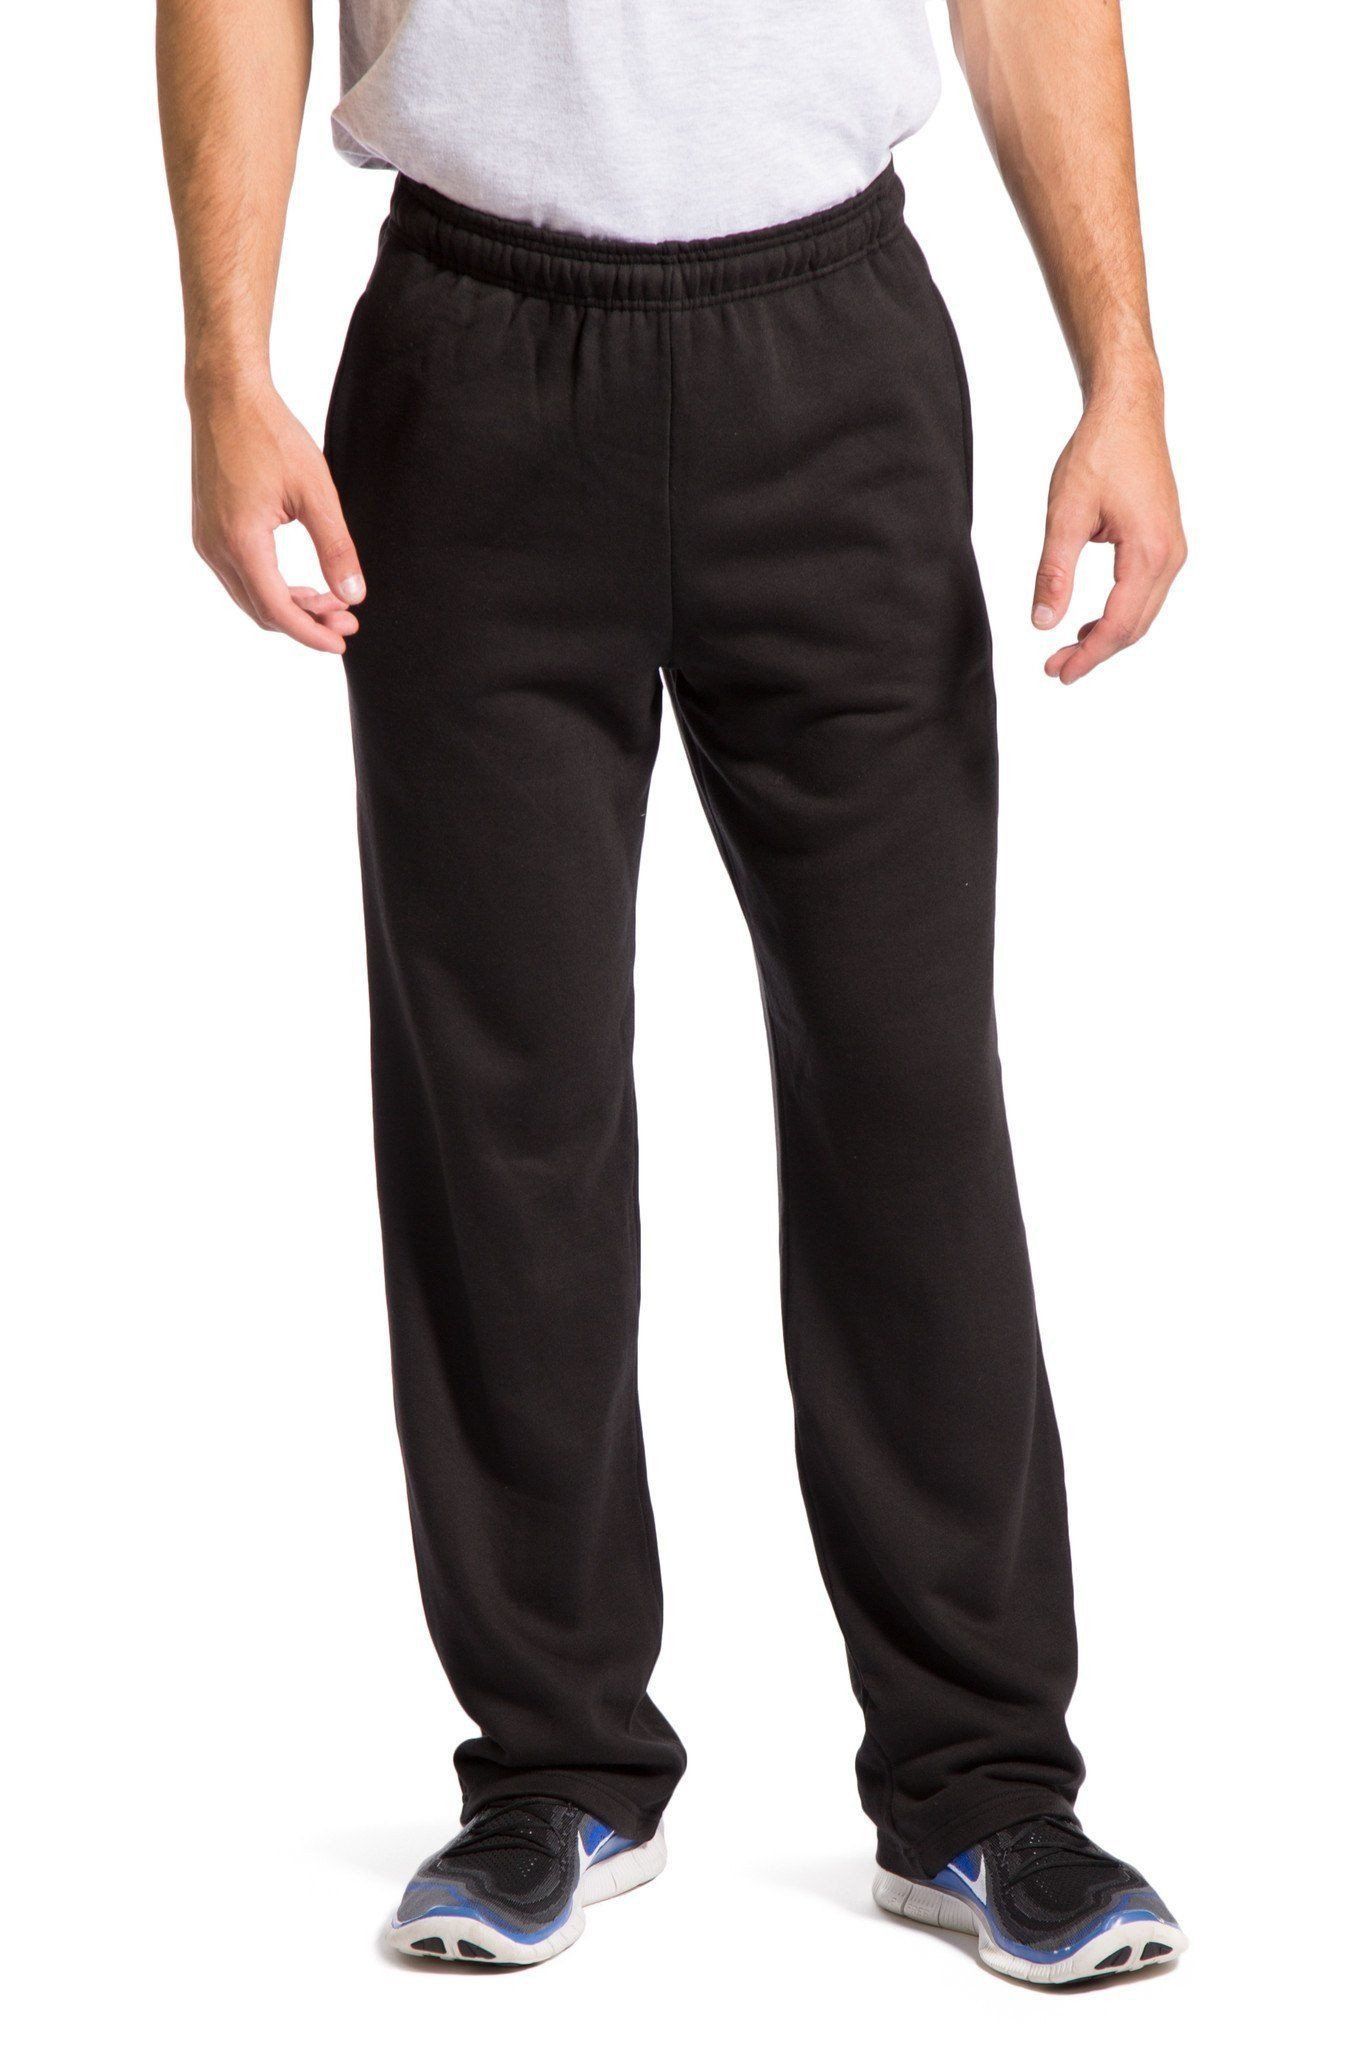 Mens Sweatpants Ecofrabic Mens Athletic Pants Fishers Finery